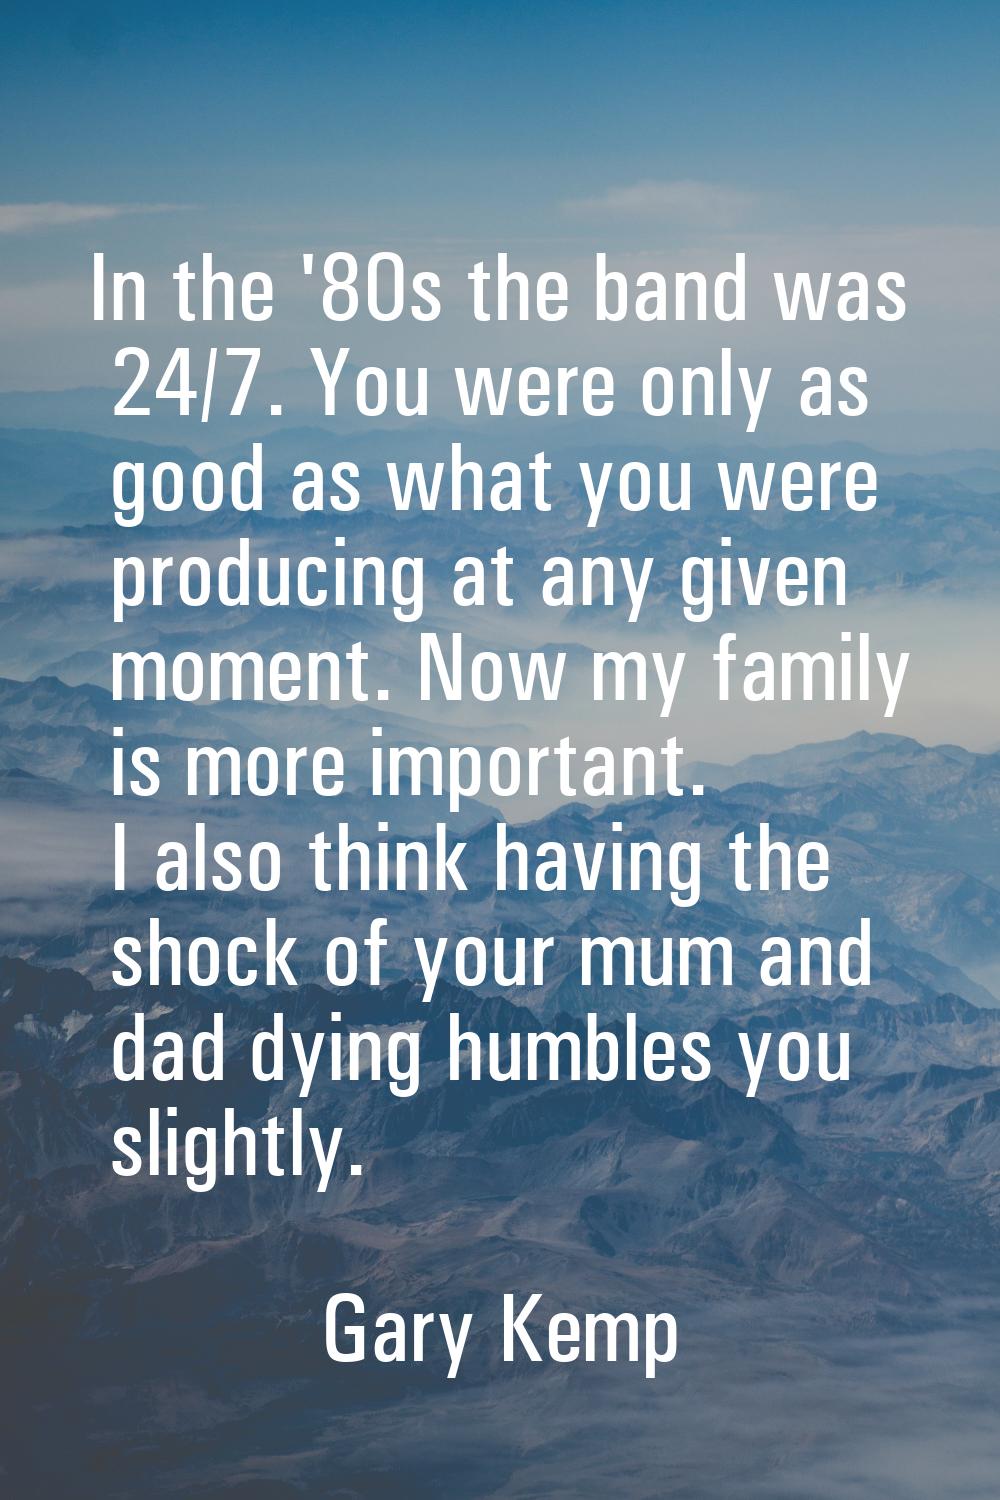 In the '80s the band was 24/7. You were only as good as what you were producing at any given moment